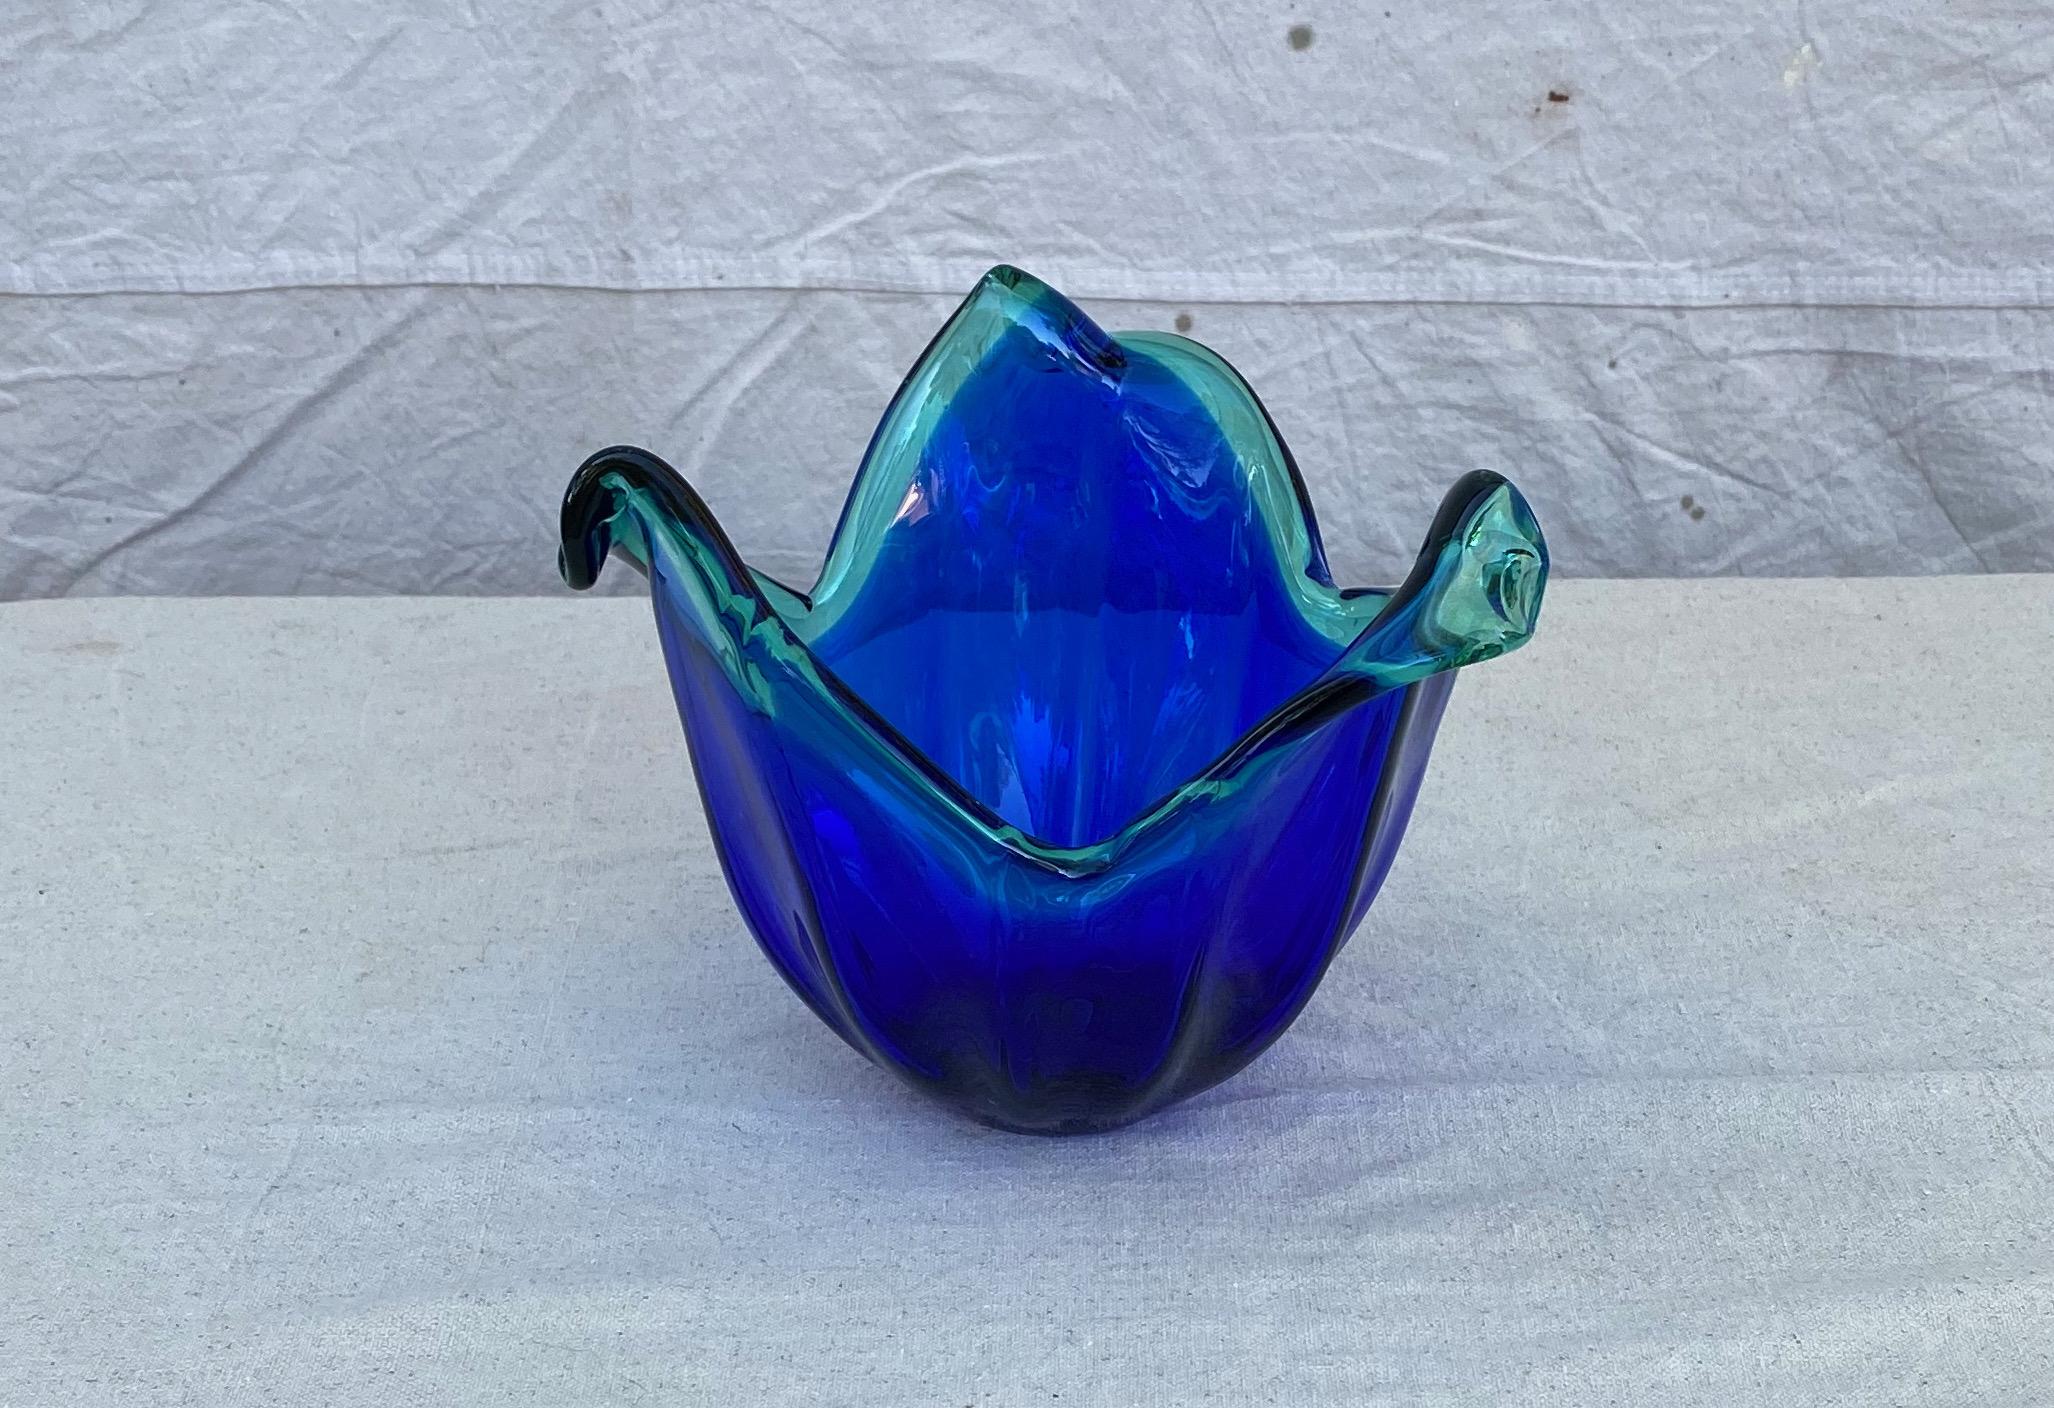 Mid-Century Modern 1960s Blue Murano with Teal Green Accents Vase